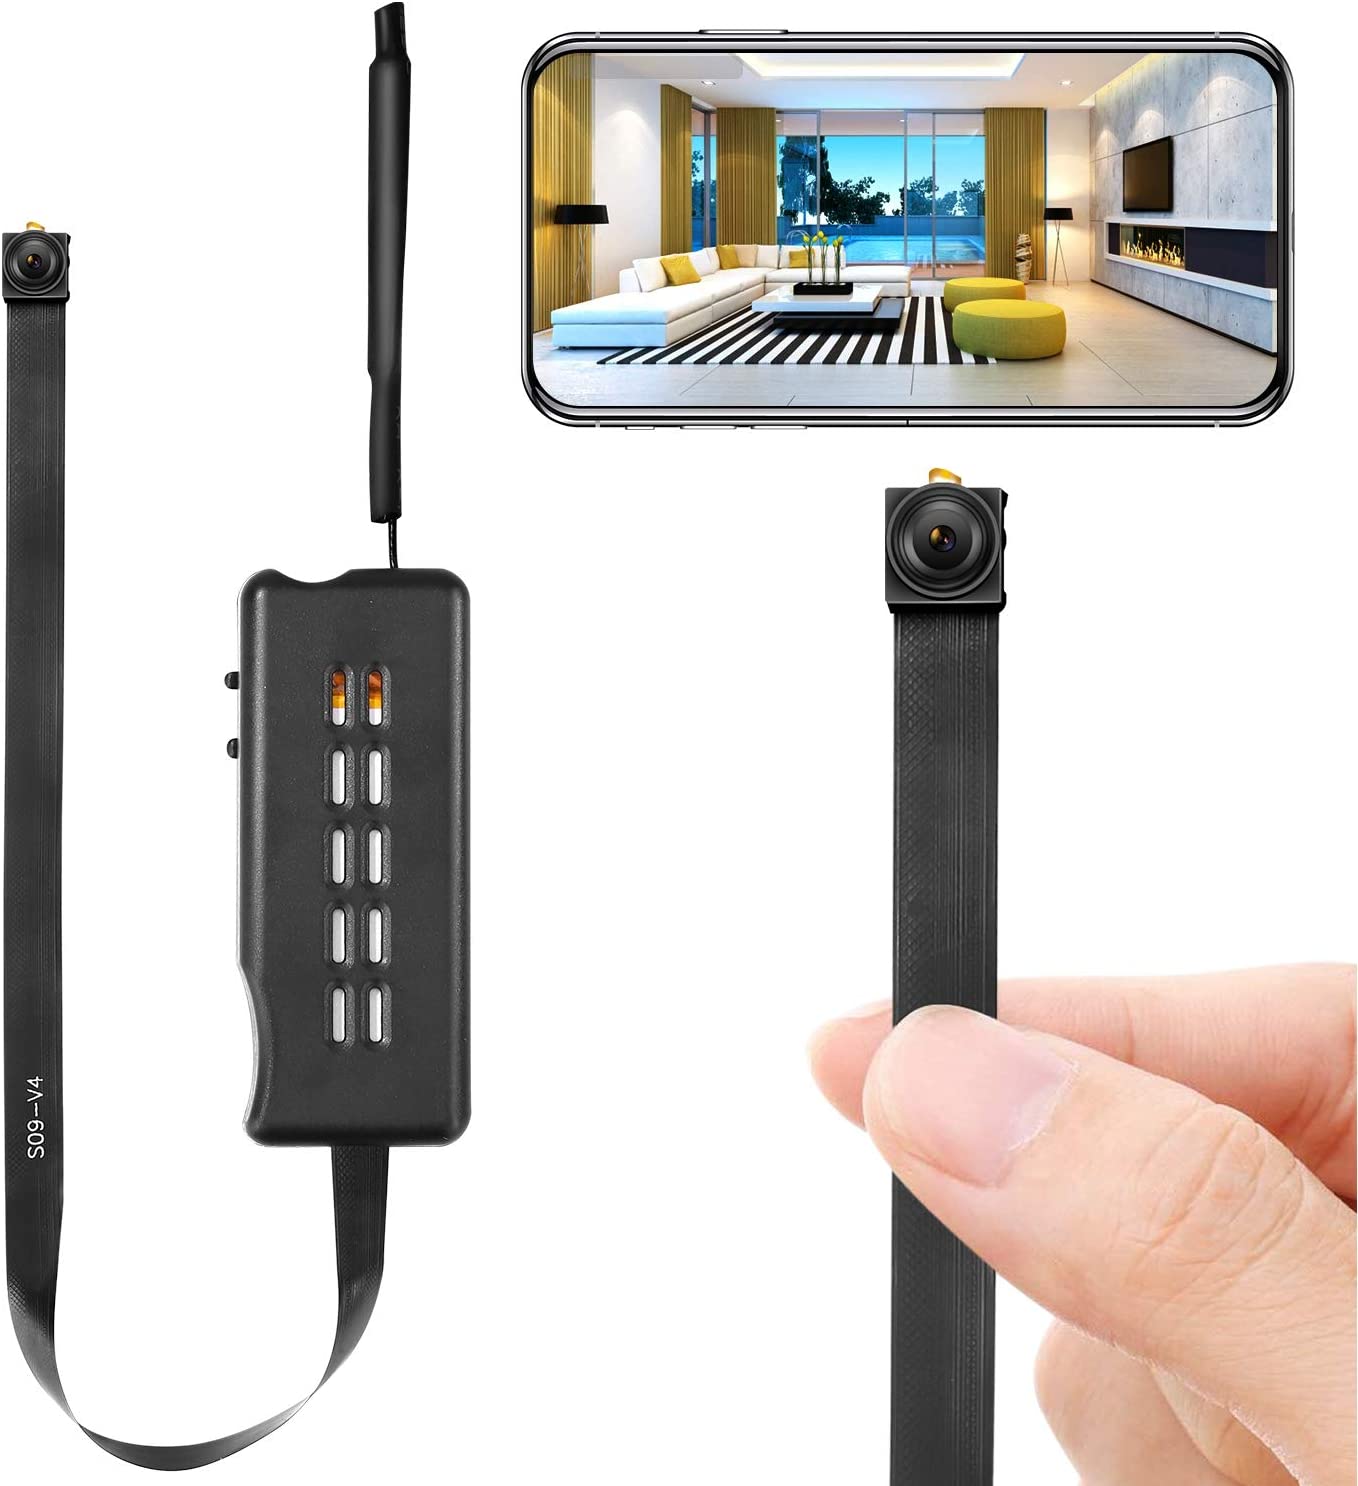 Spy Camera Module Wireless Hidden Camera WiFi Mini Cam HD 1080P DIY Tiny Cams Small Nanny Cameras Home Security Live Streaming Through Android/iOS App Motion Detection Alerts